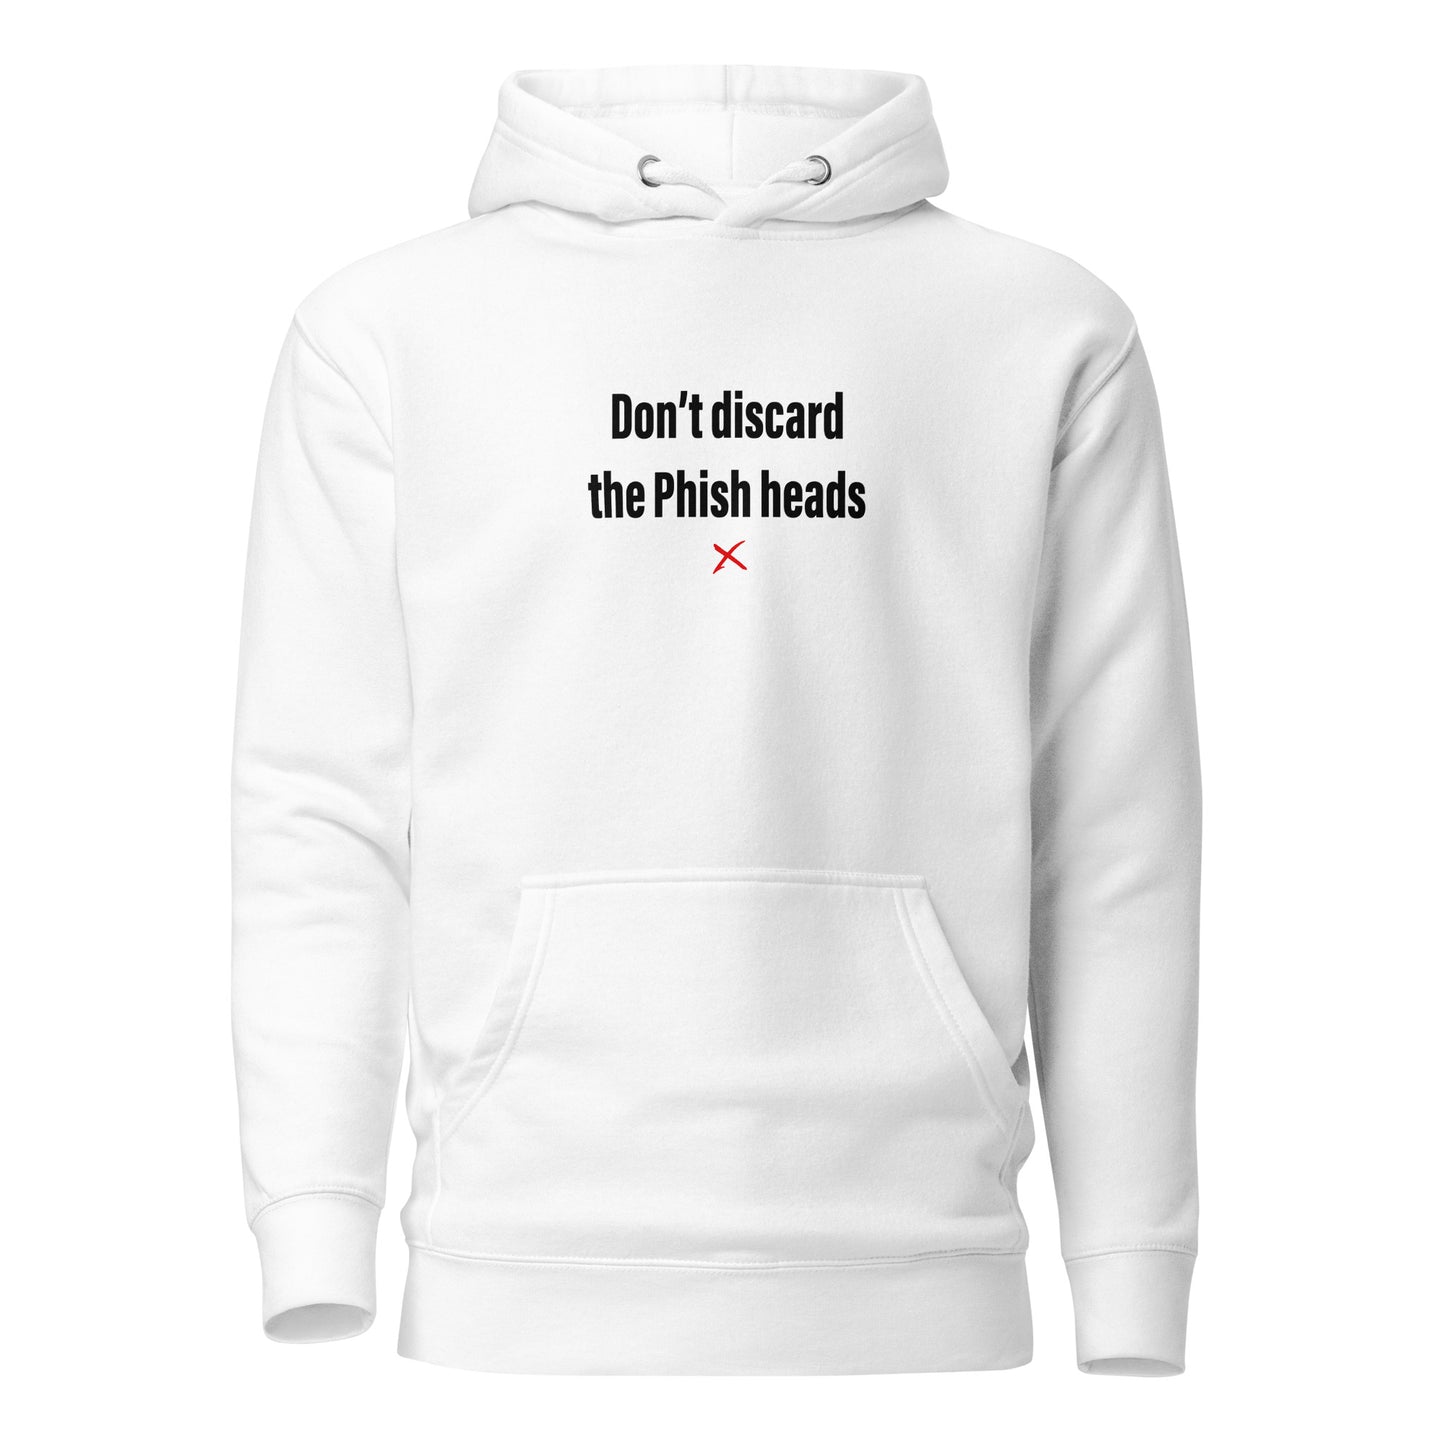 Don't discard the Phish heads - Hoodie